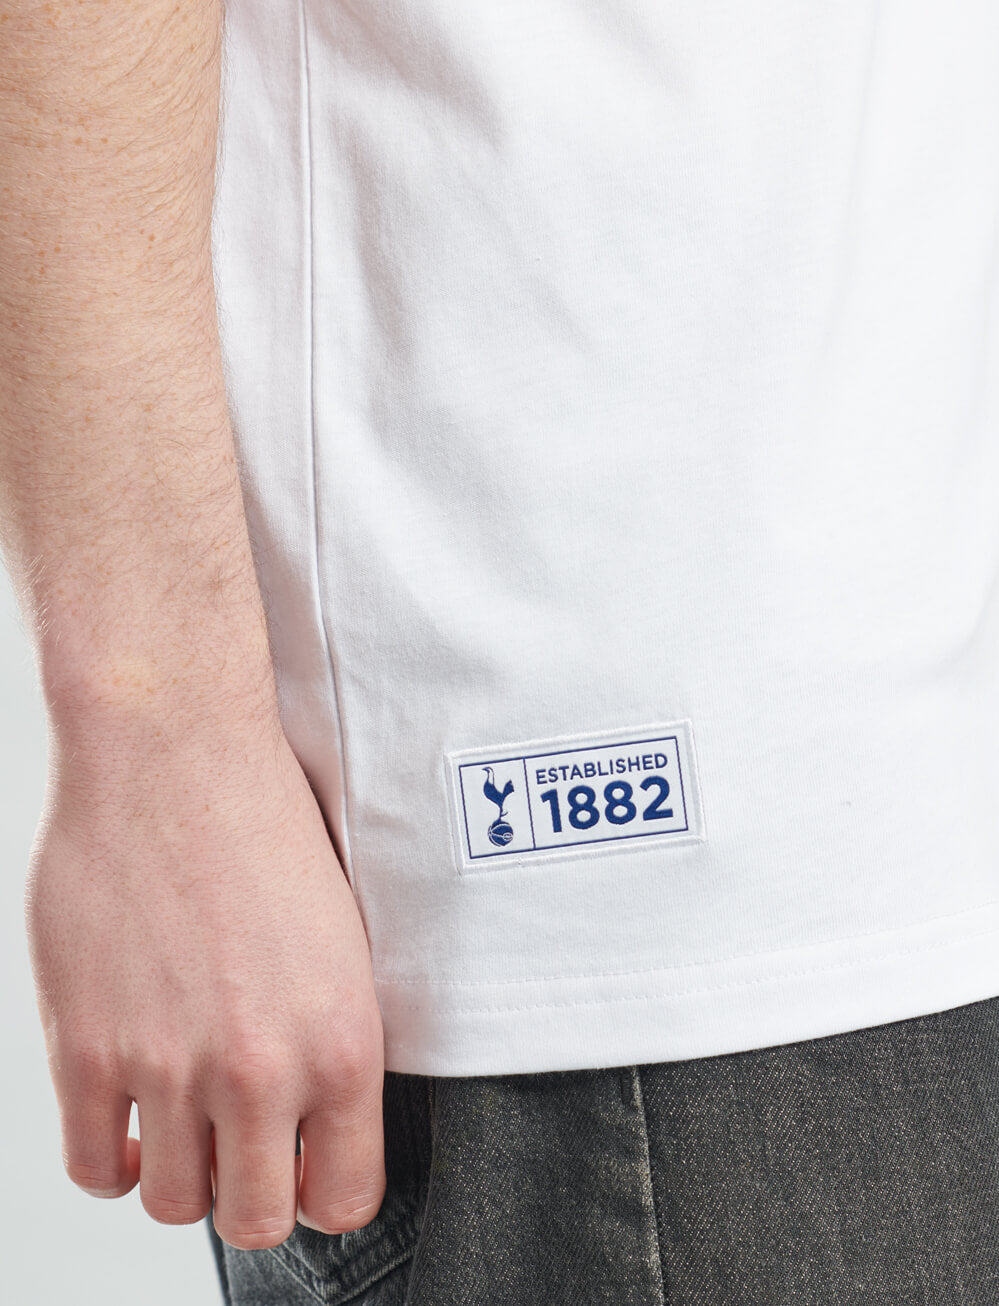 Official Tottenham Graphic T-Shirt - White - The World Football Store